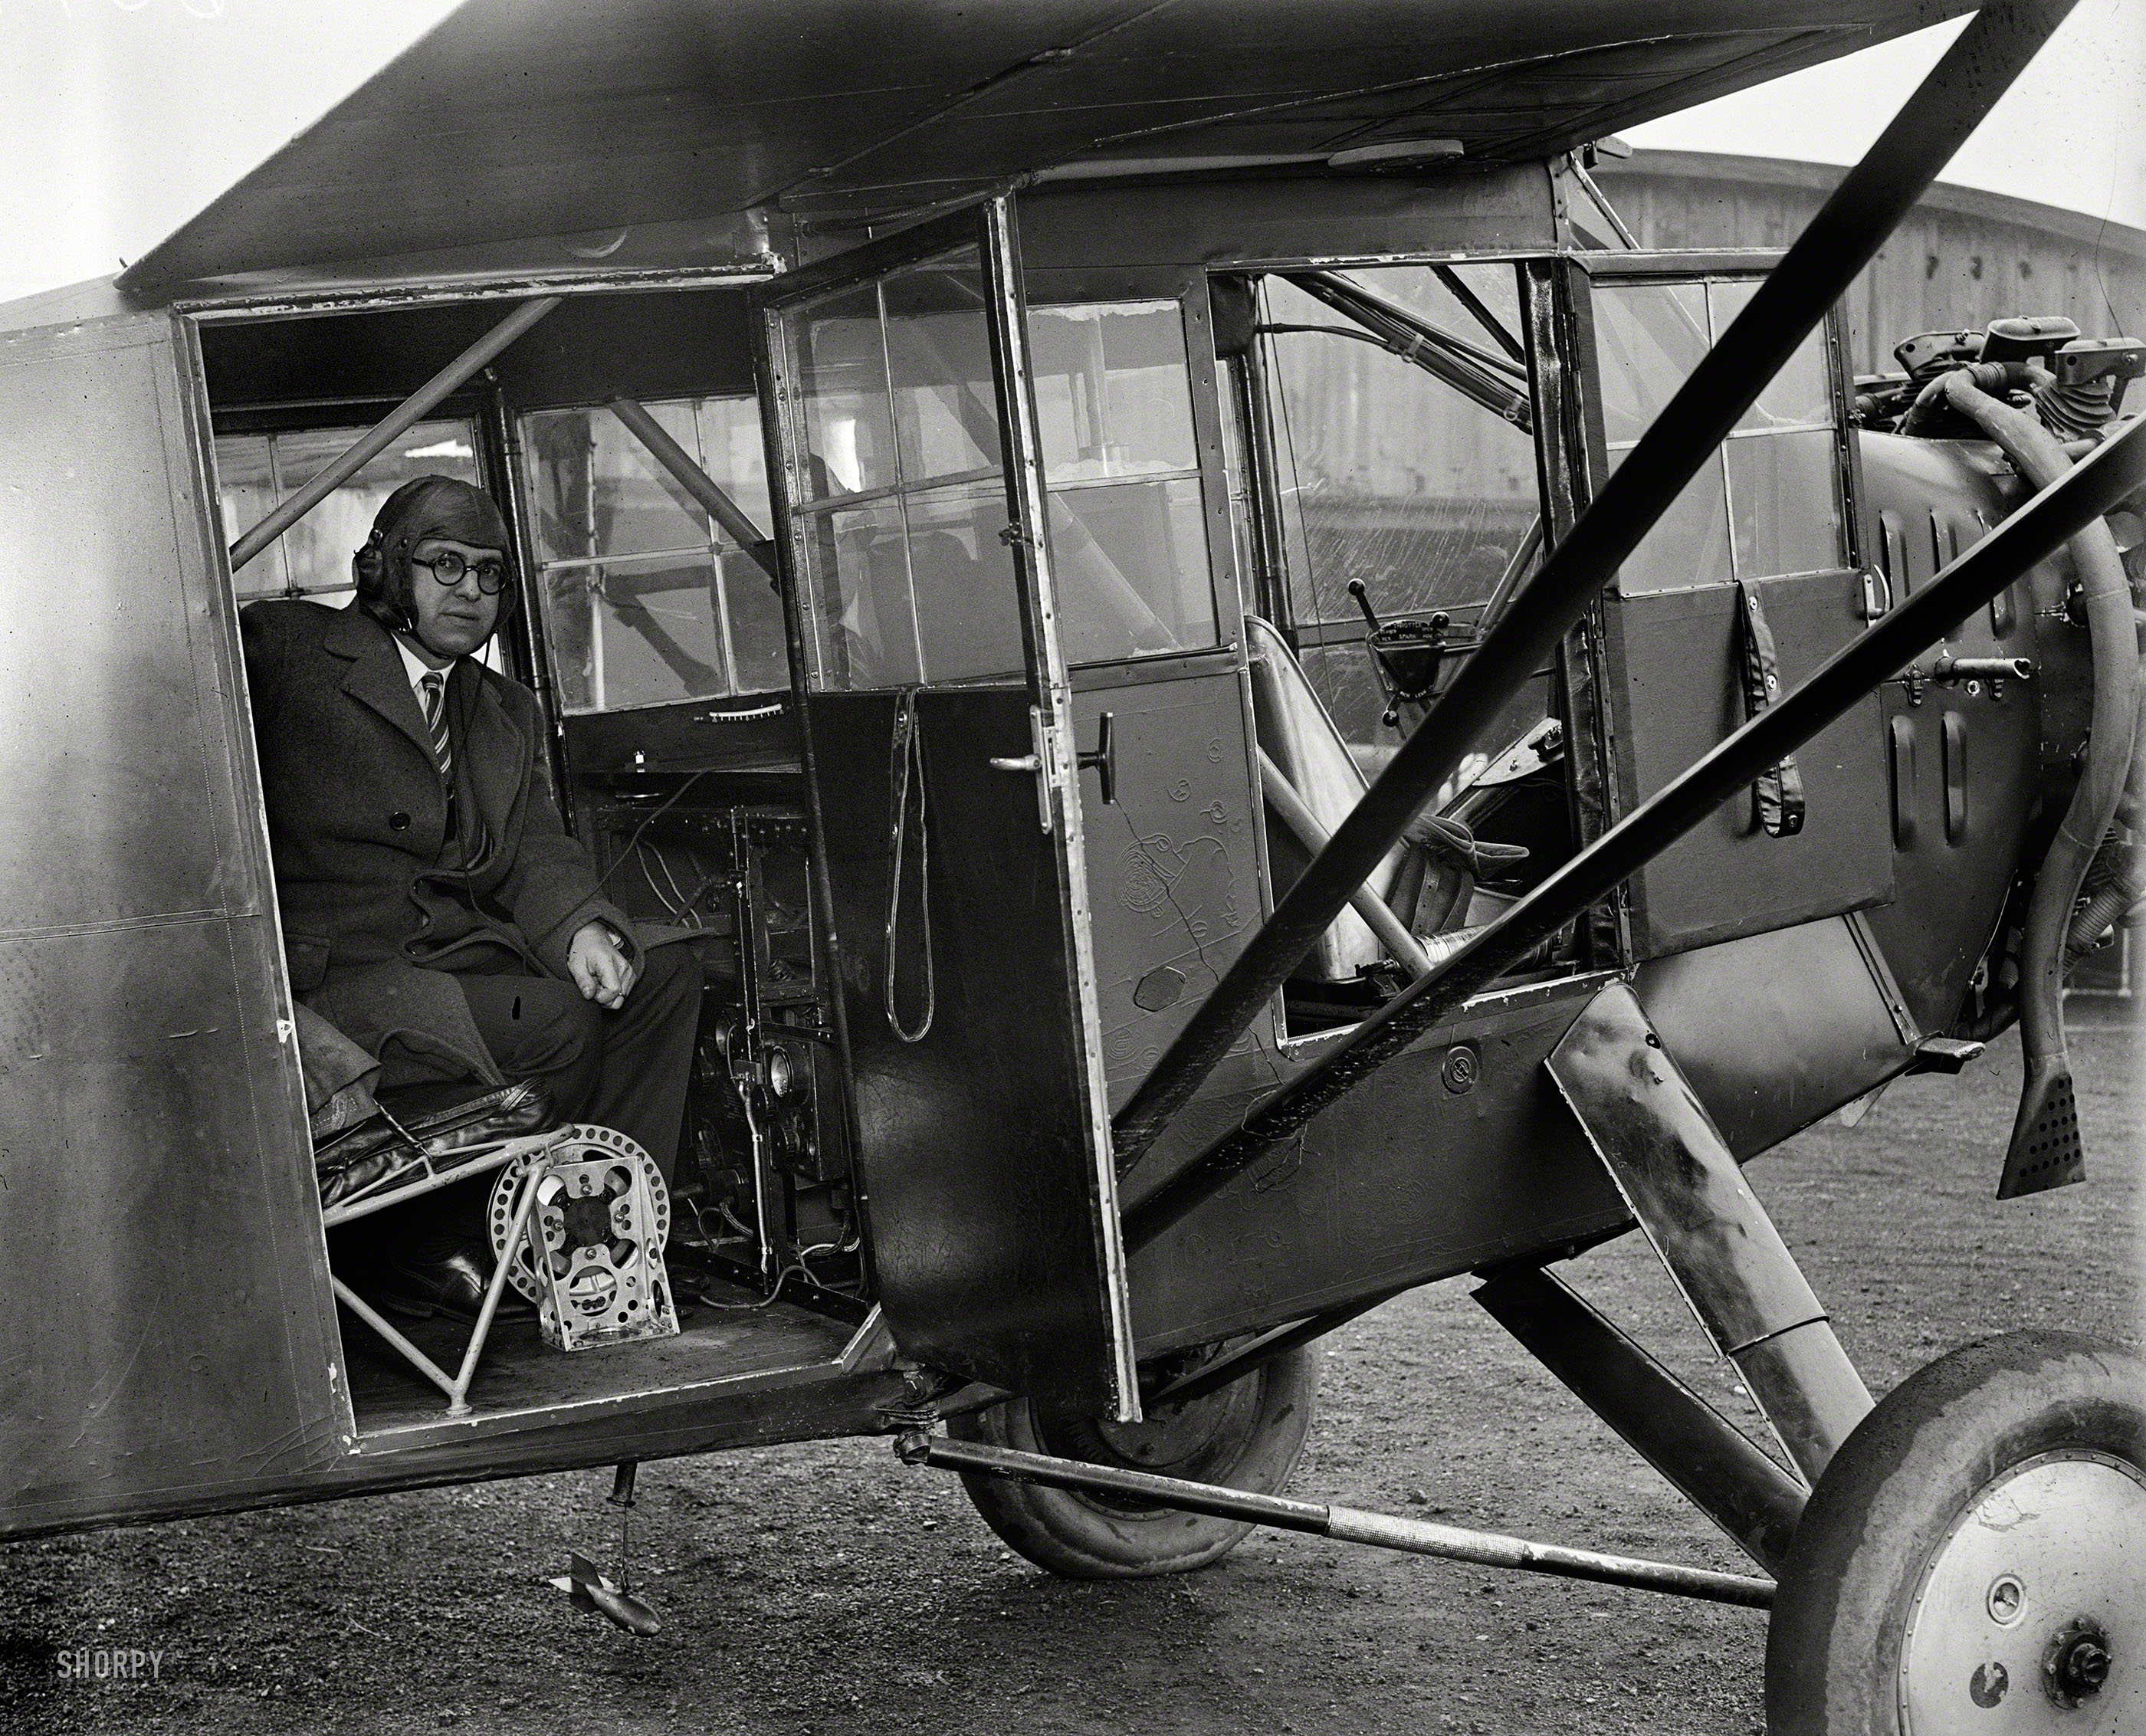 1929. Washington, D.C., or vicinity. "NO CAPTION [Man in airplane]." Next-door neighbor to this image in the Harris & Ewing negative series. View full size.